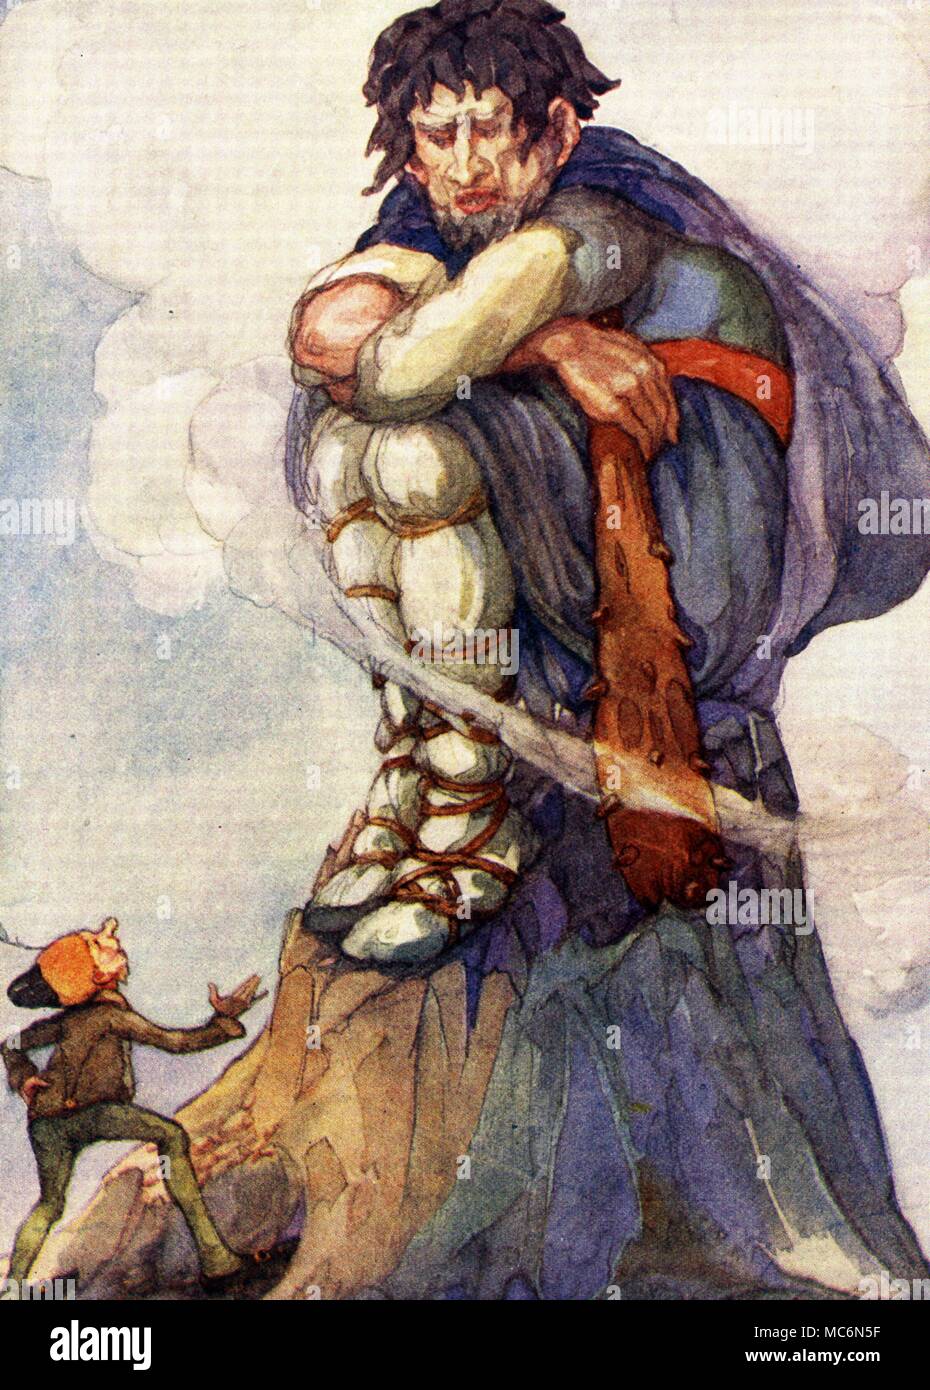 Fairy Stories The Giant When he reached the highest point he found a great giant by Anne Anderson for The Valiant Little Tailor 1933 edition Stock Photo